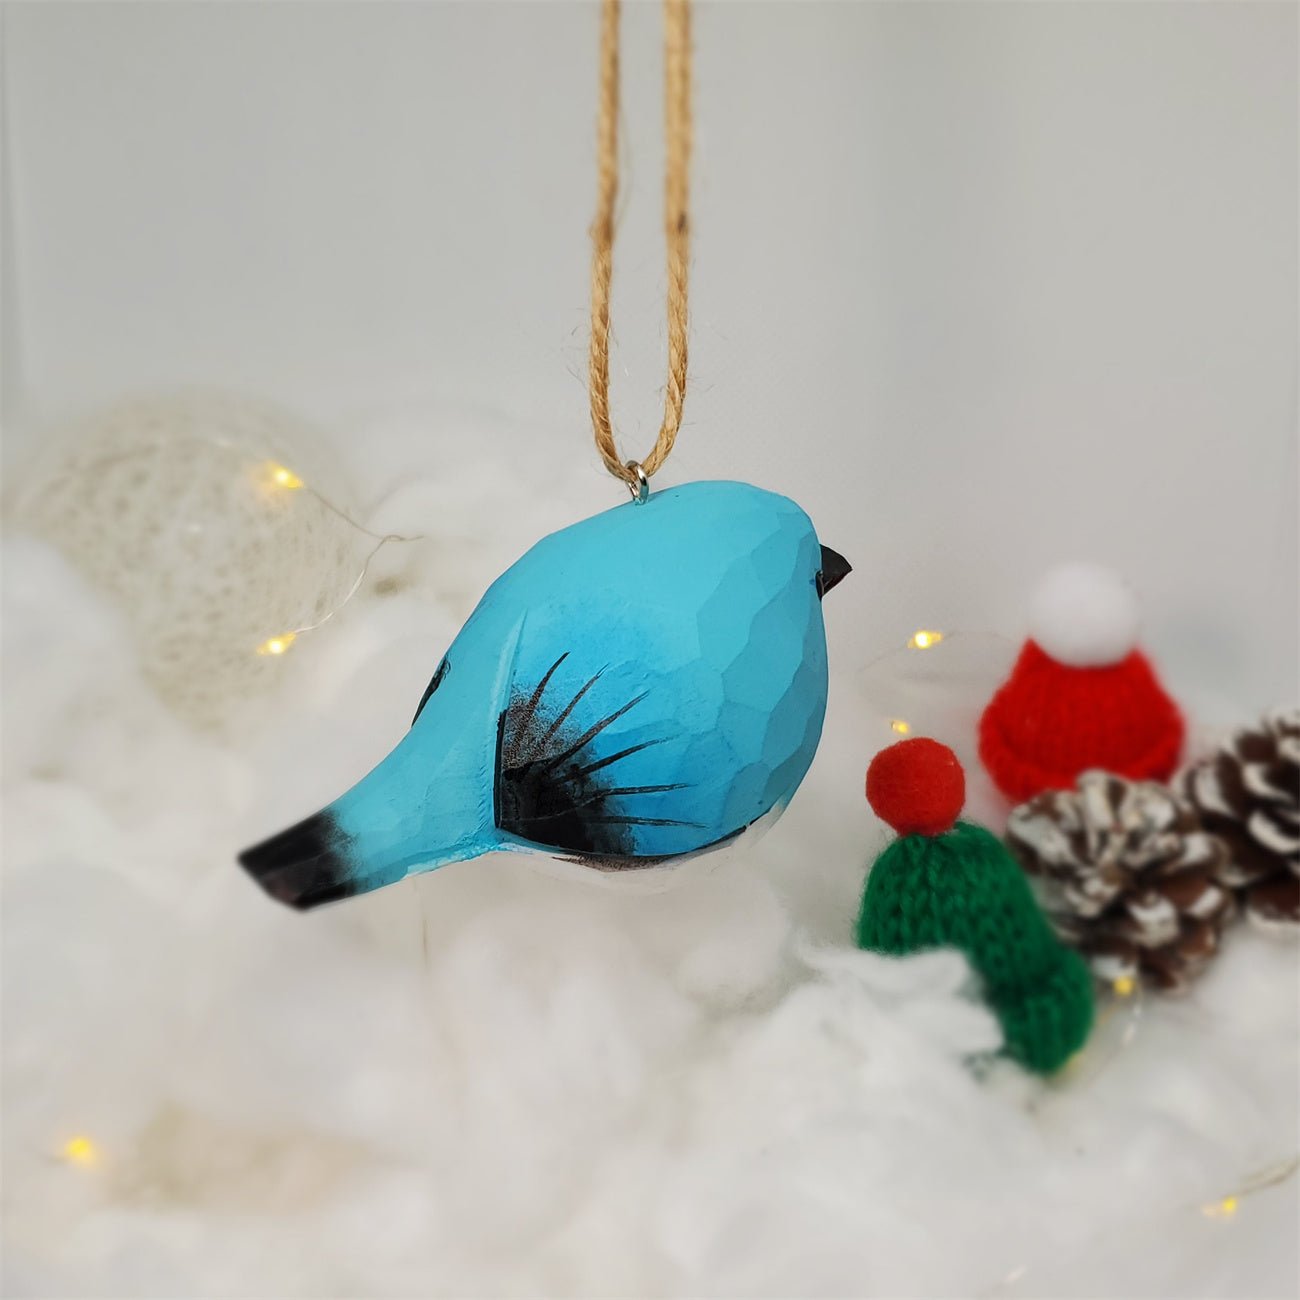 BlueBird-B Carved and Painted Wooden Bird Ornaments - PAINTED BIRD SHOP